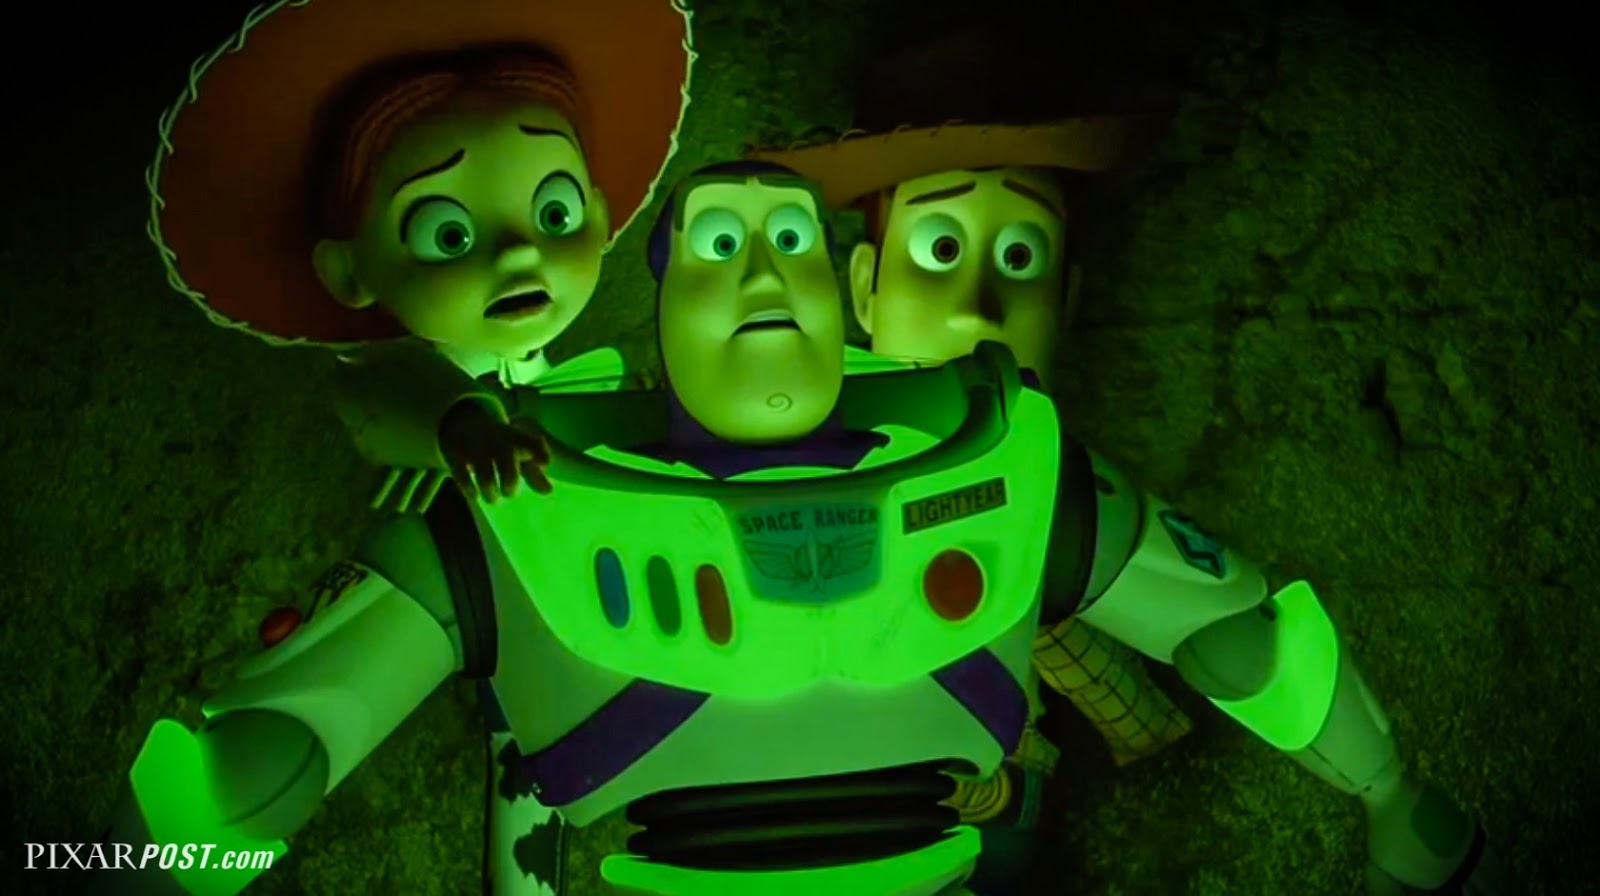 Nice Images Collection: Toy Story Of Terror! Desktop Wallpapers